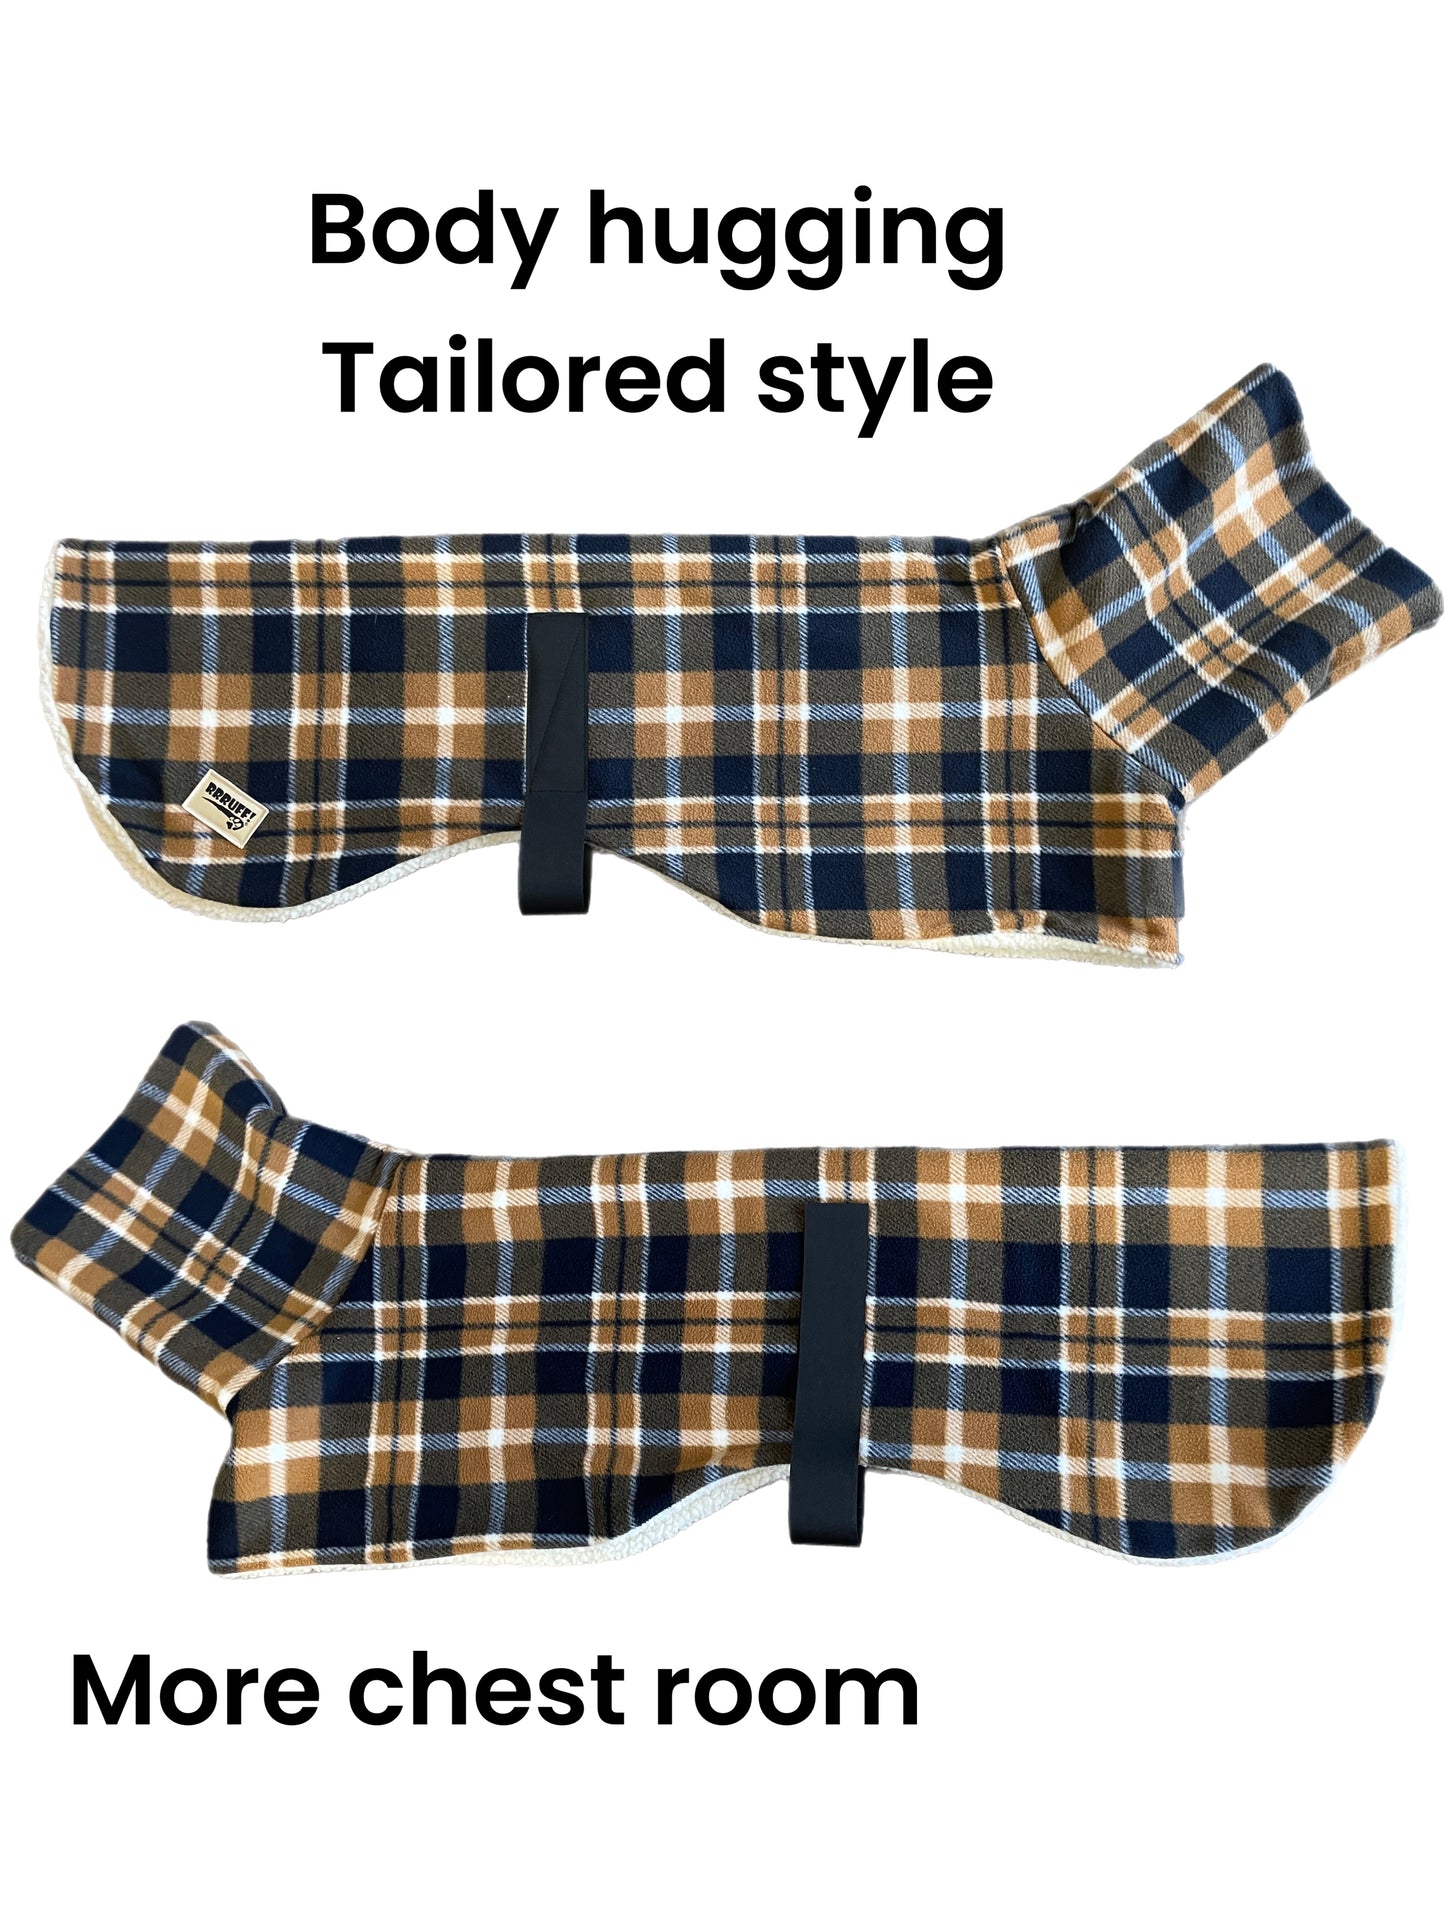 The caramel Lumberjack Greyhound coat in deluxe style rug brown/navy flanno plaid check  polar fleece washable extra wide neck